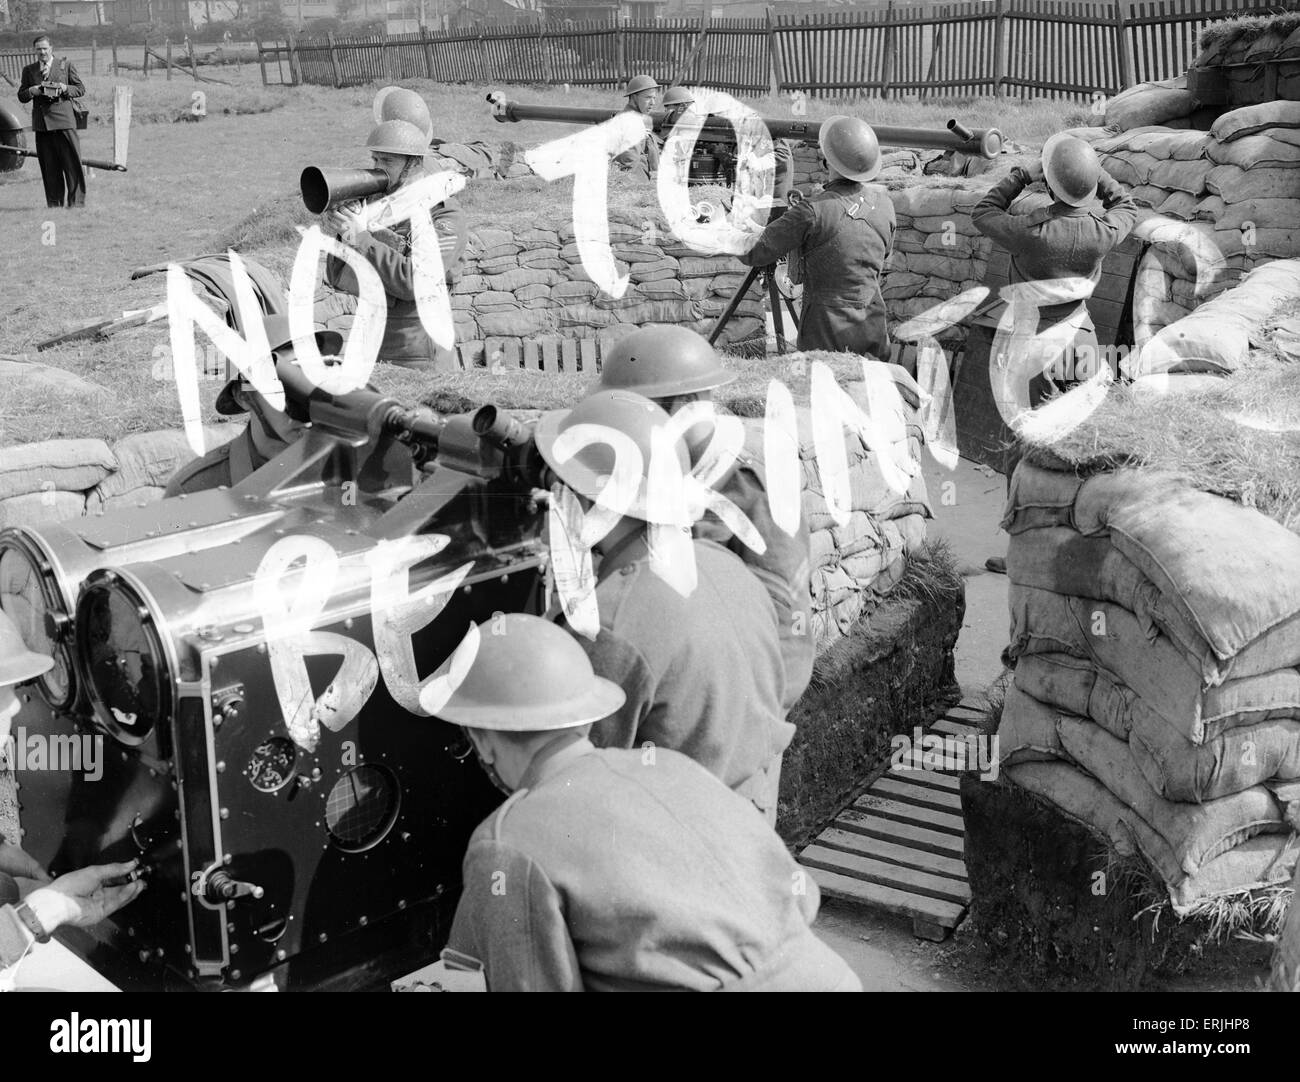 Anti Aircraft Defences, Birmingham, 10th May 1941. World War Two Air Raids, Birmingham. NOT TO BE PRINTED. Warning from Censors. Photograph was censored at time, due to visibility of Range Finder. Stock Photo